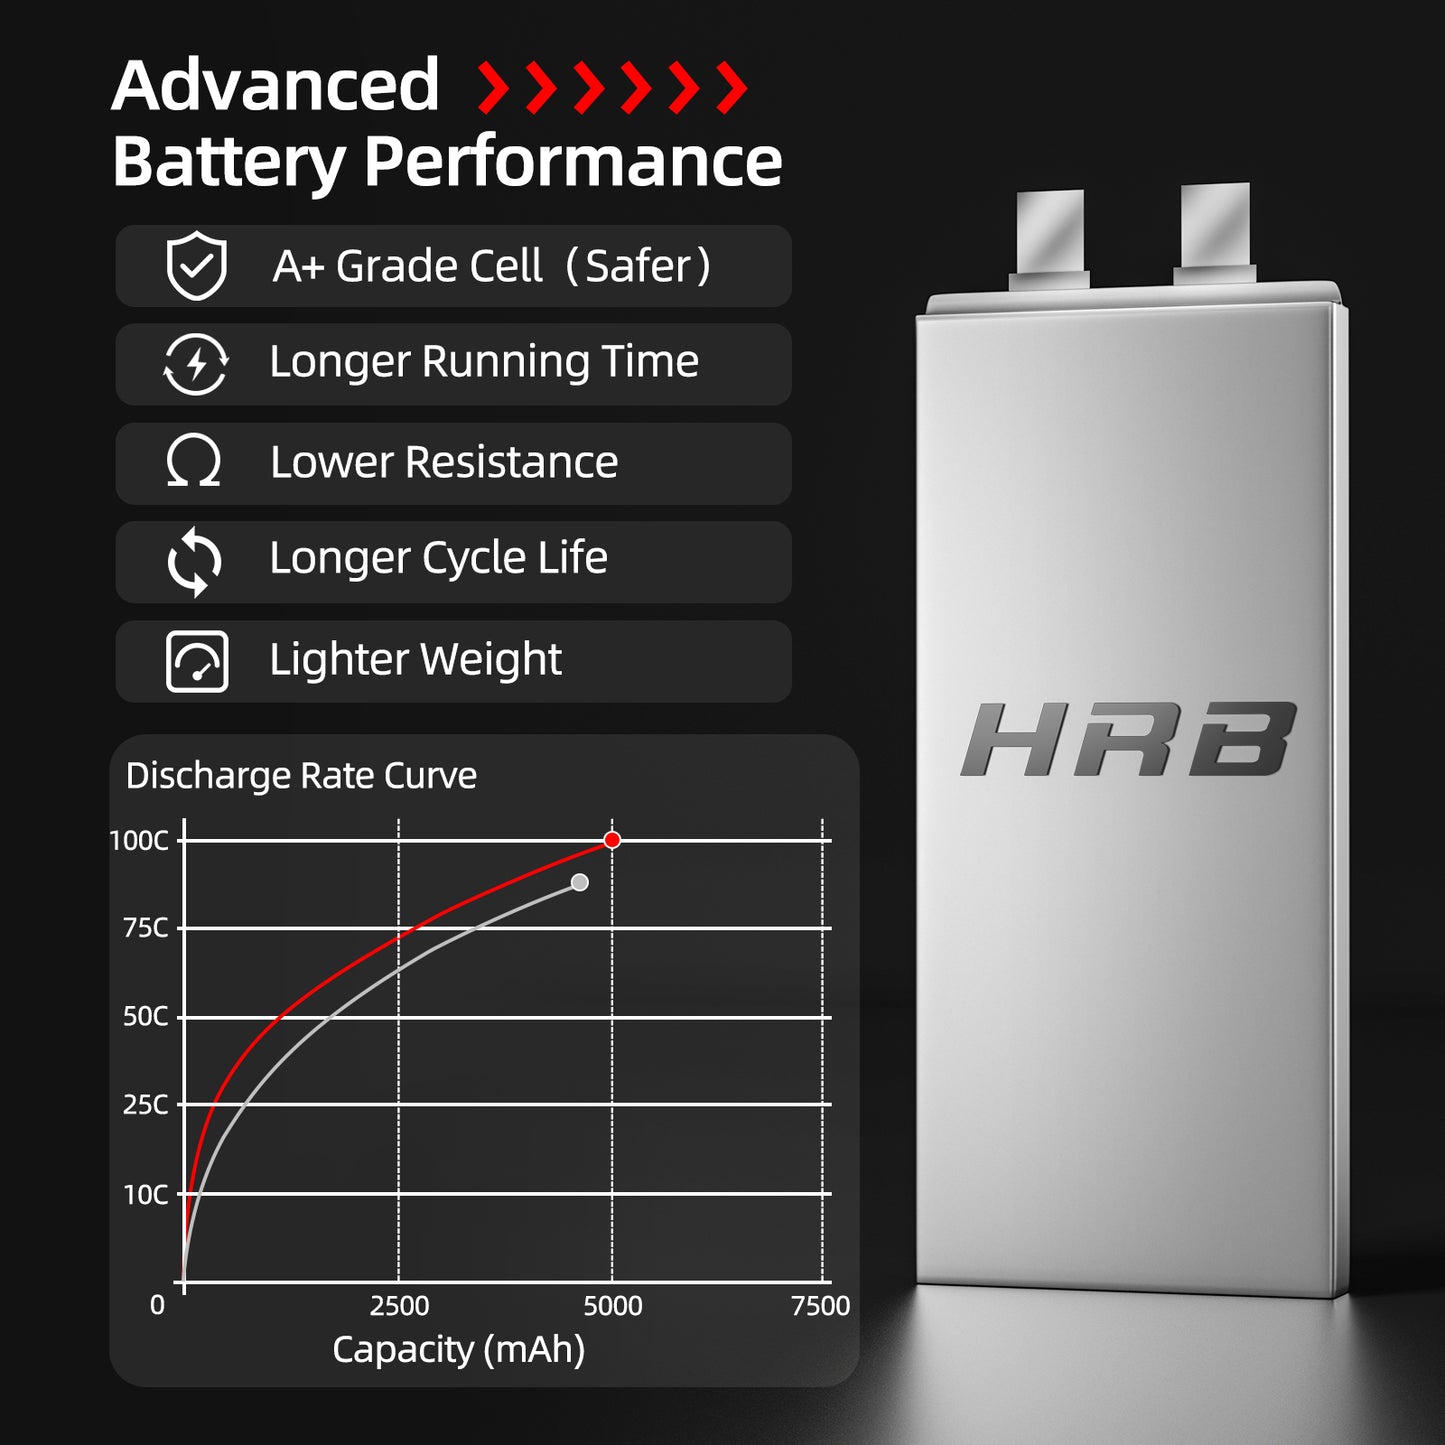 HRB 18.5V LiPo Battery 5000mAh 100C with XT90 Plug for RC Airplane/Helicopter/Car/Truck/Boat